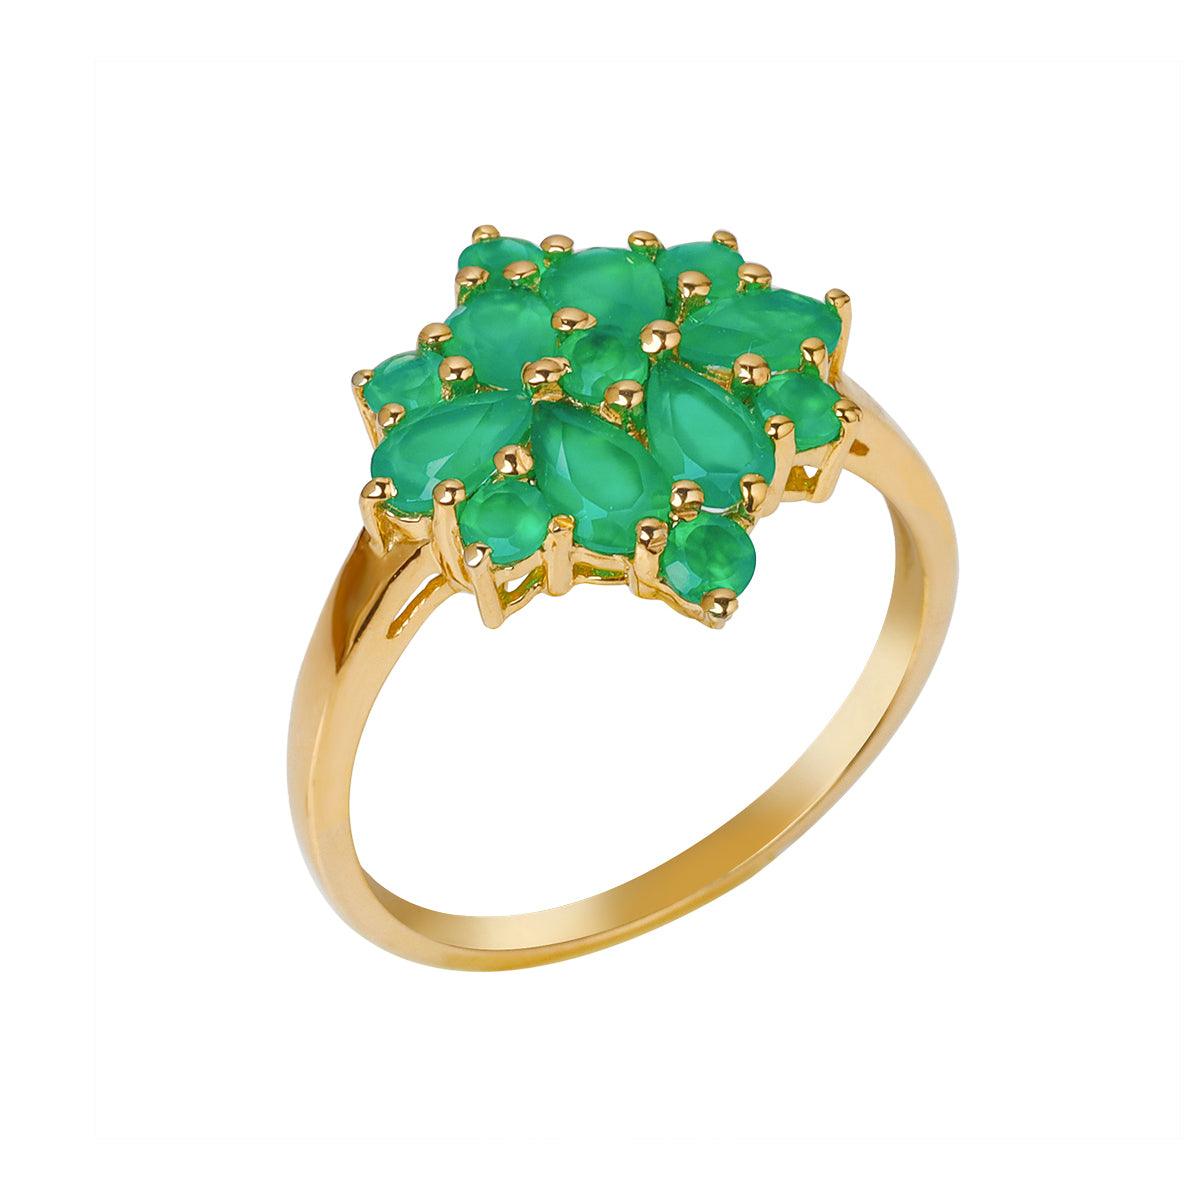 Green Onyx Cluster Ring 14k Gold Over 925 Silver - YoTreasure